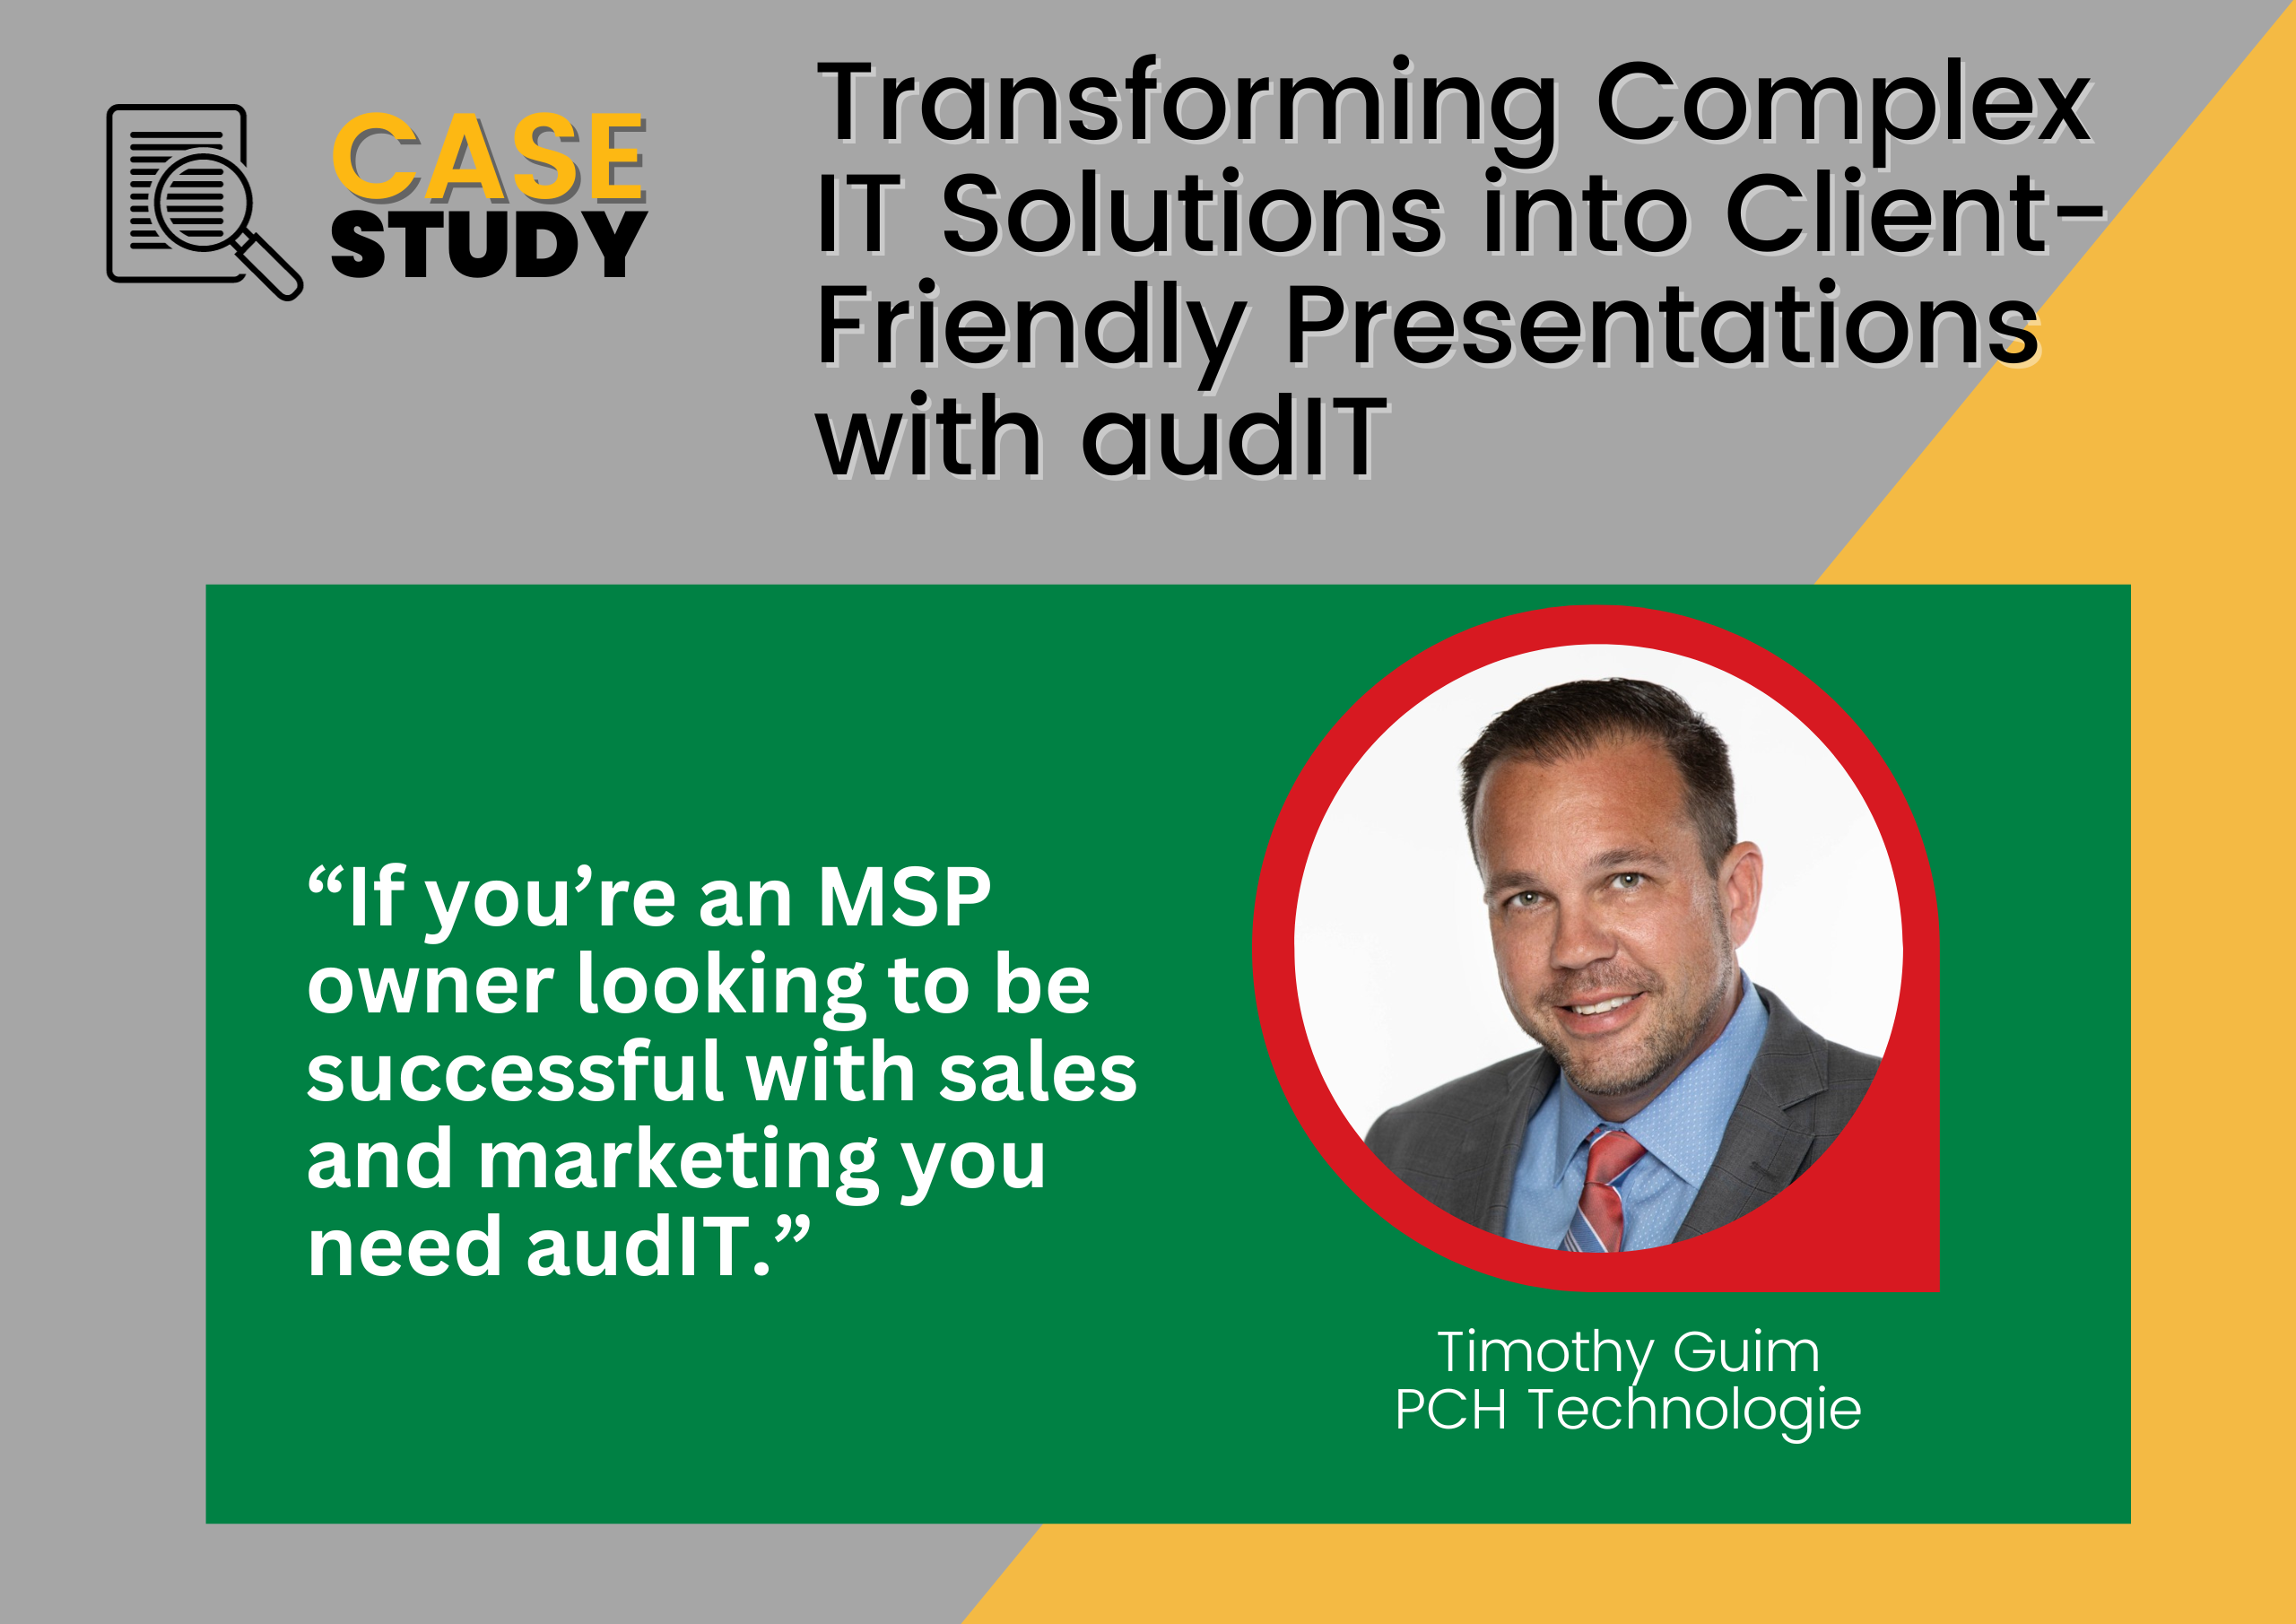 Transforming-Complex-IT-Solutions-into-Client-Friendly-Presentations-with-audIT-2560-by-1811